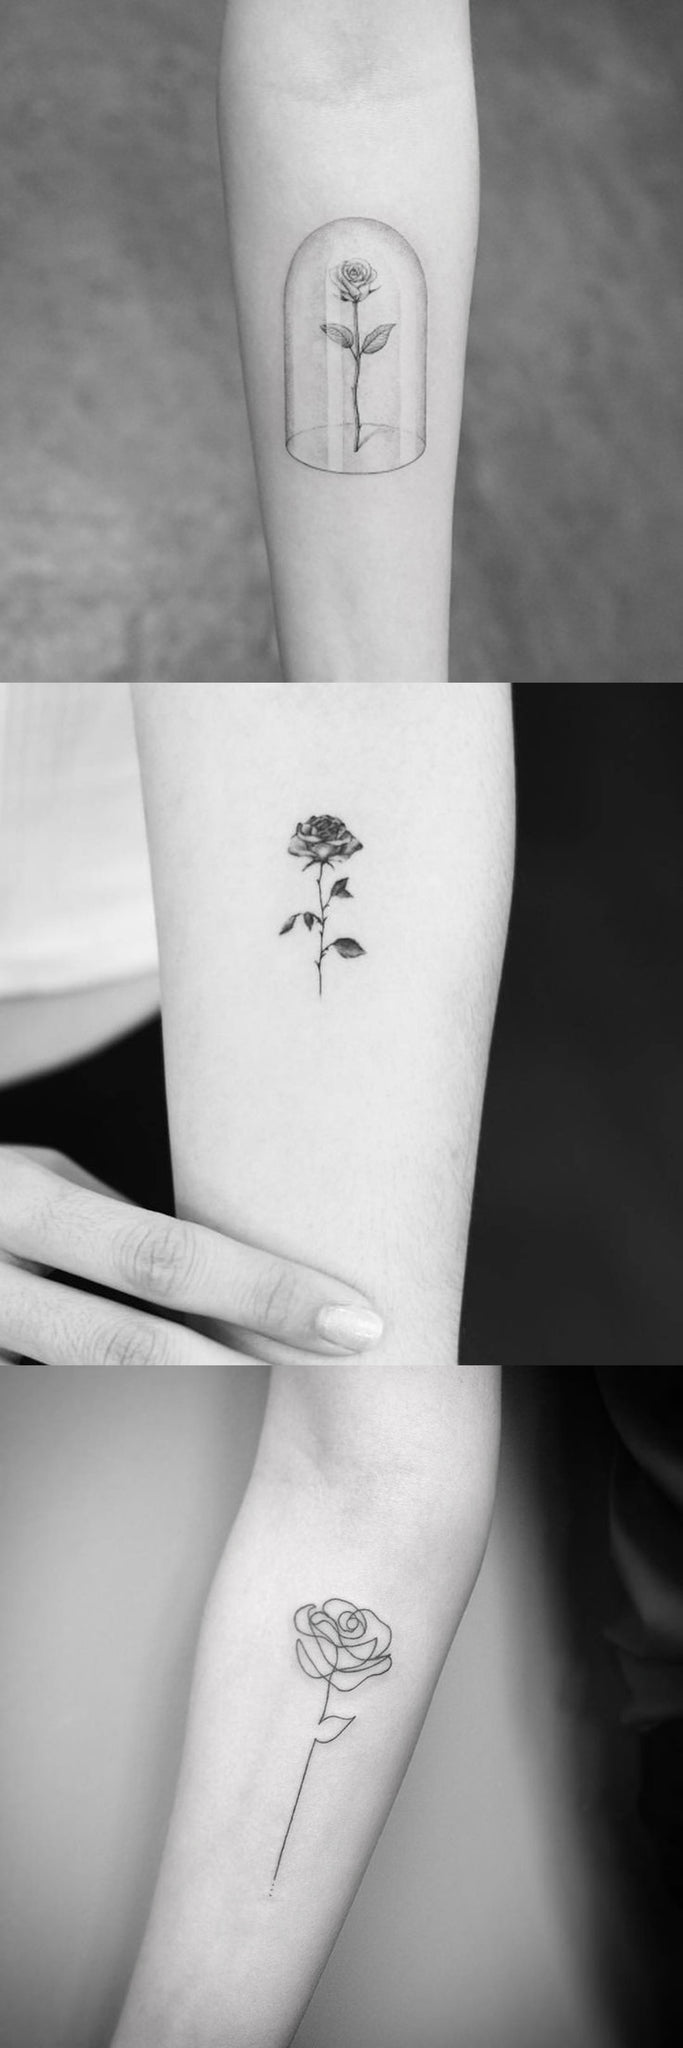 30 Free And Simple Small Tattoo Ideas For The Minimalist Mybodiart